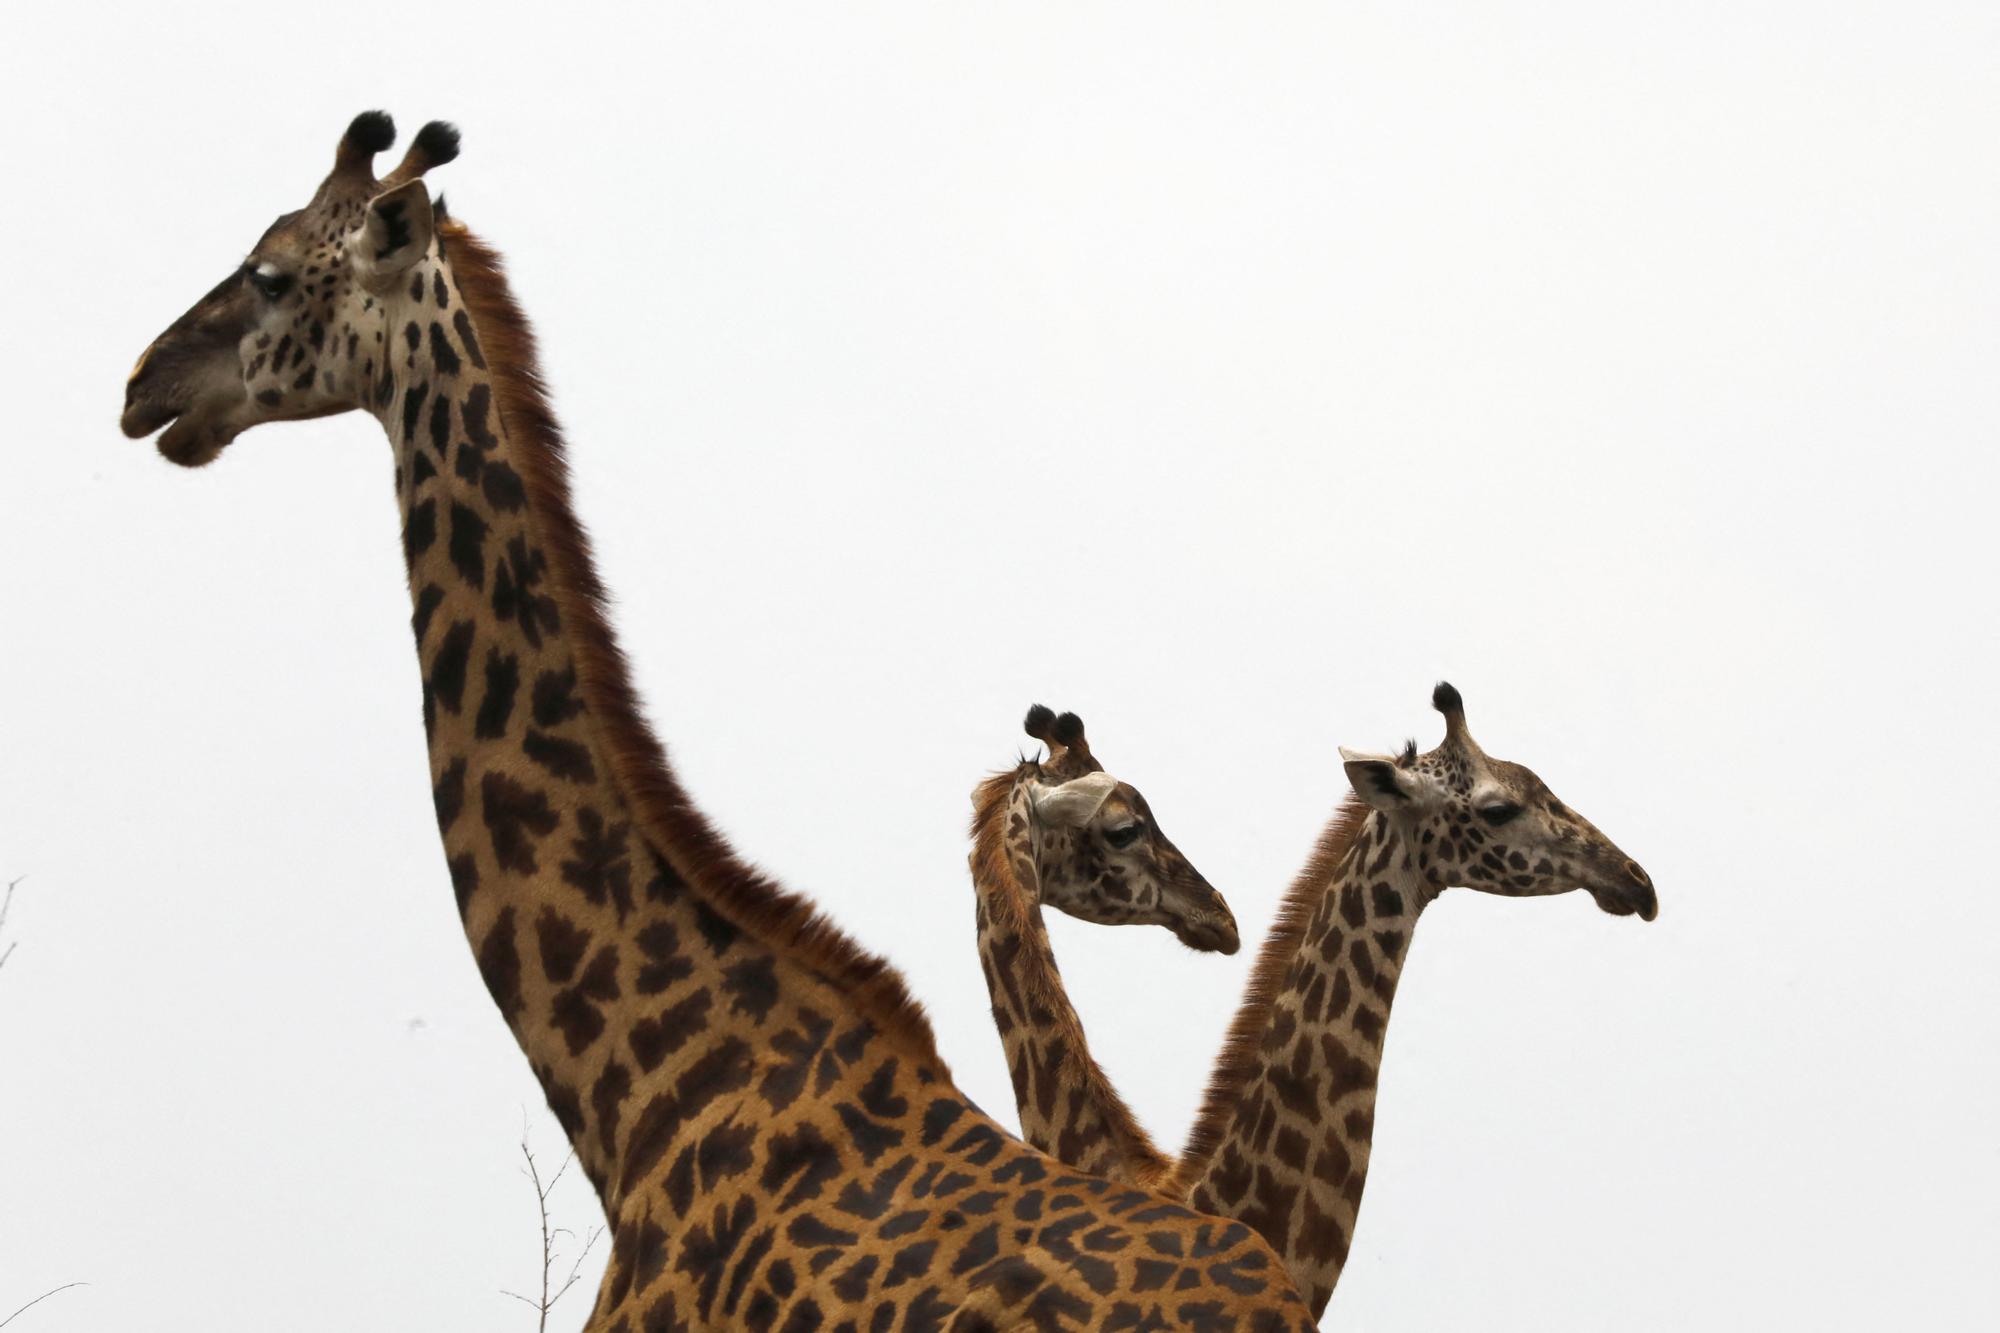 Giraffes stand together in the Nairobi National Park